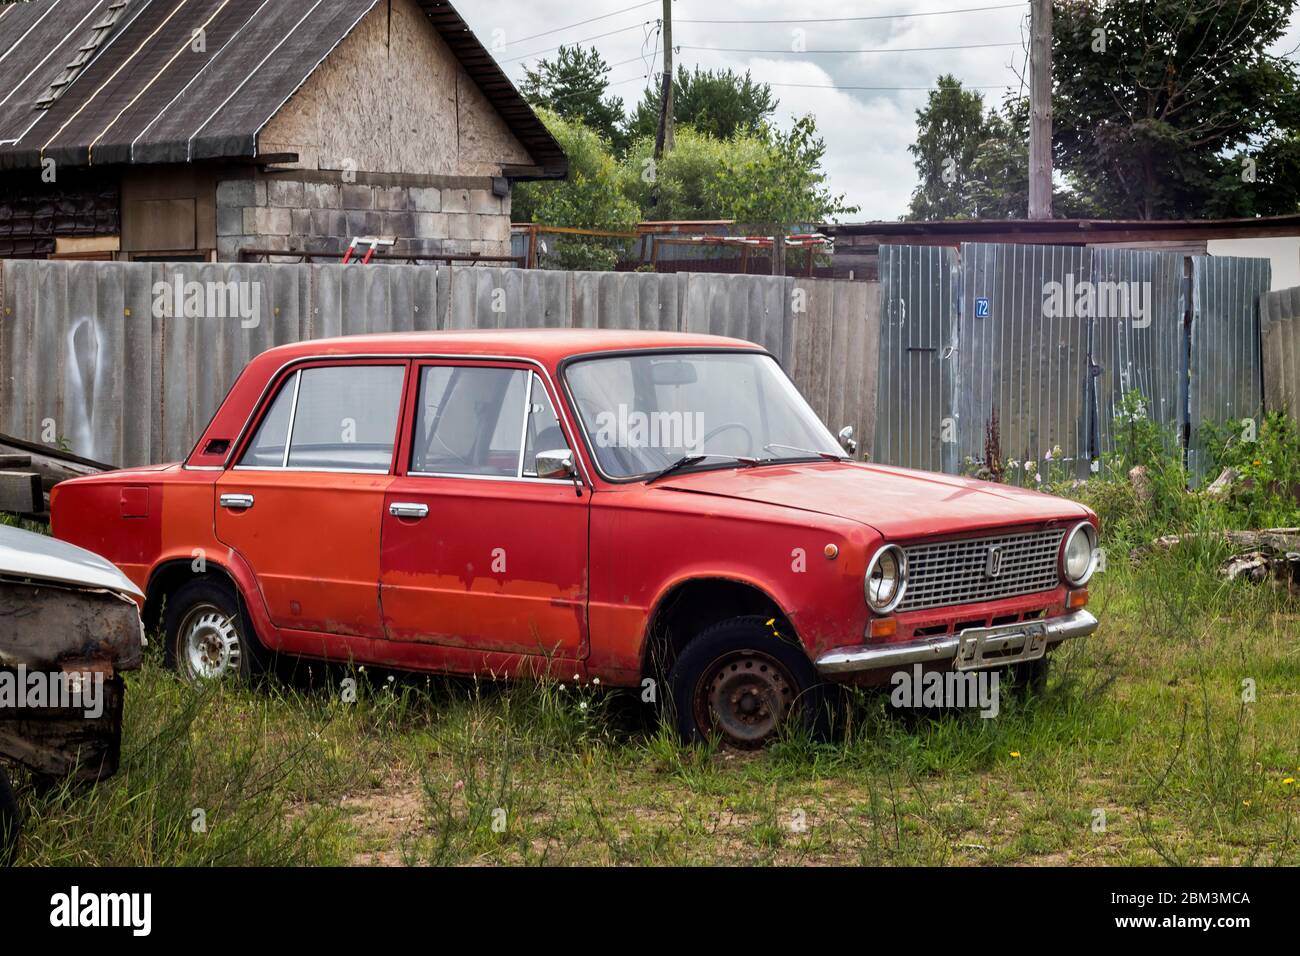 An old red Lada car with holey numbers is standing in front of a village house. Stock Photo